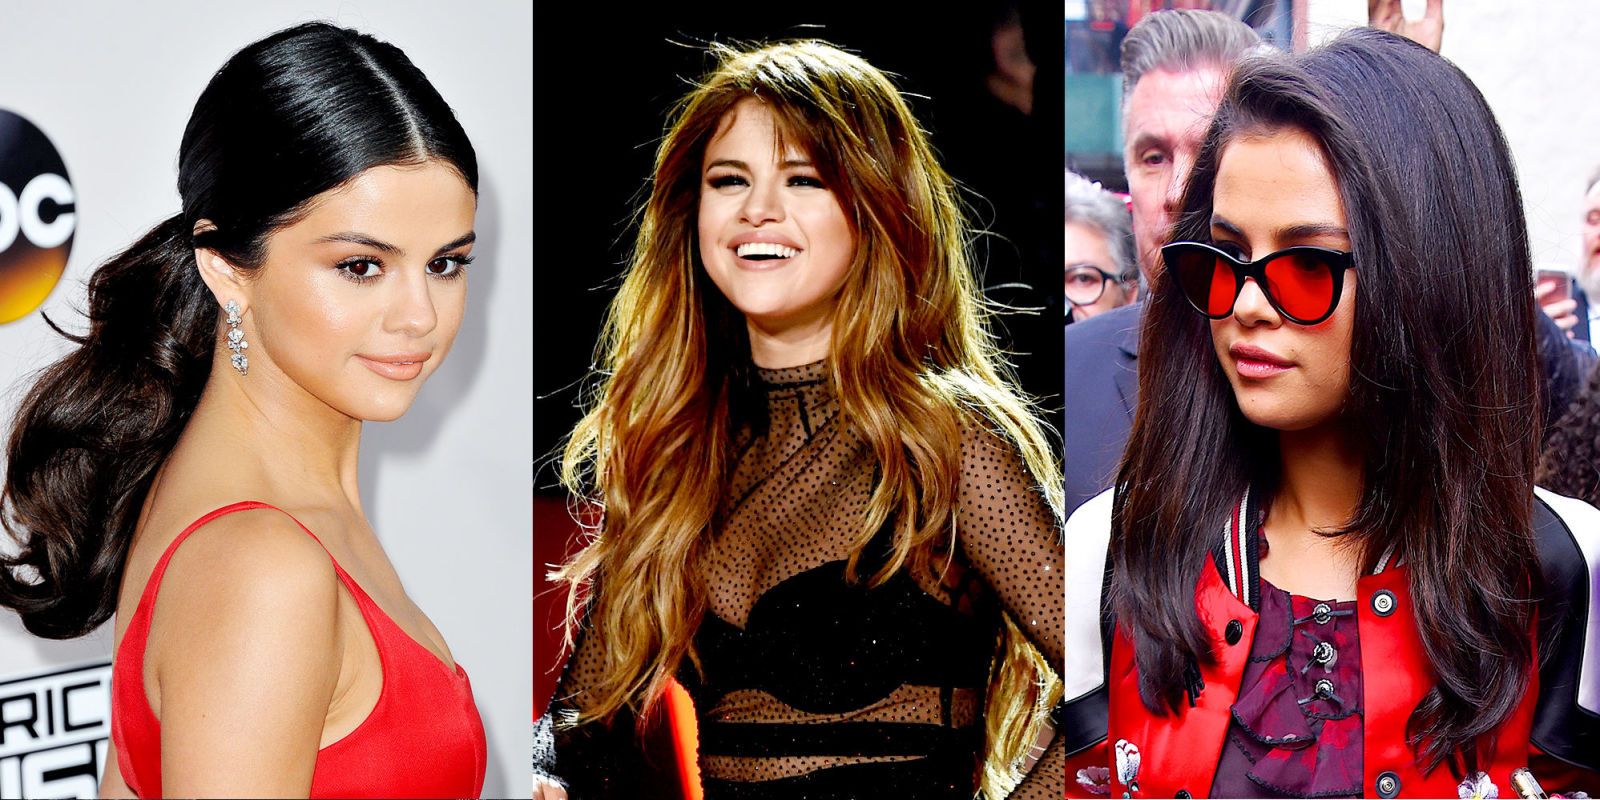 Selena Gomez is rocking a new hairstyle - see the photo